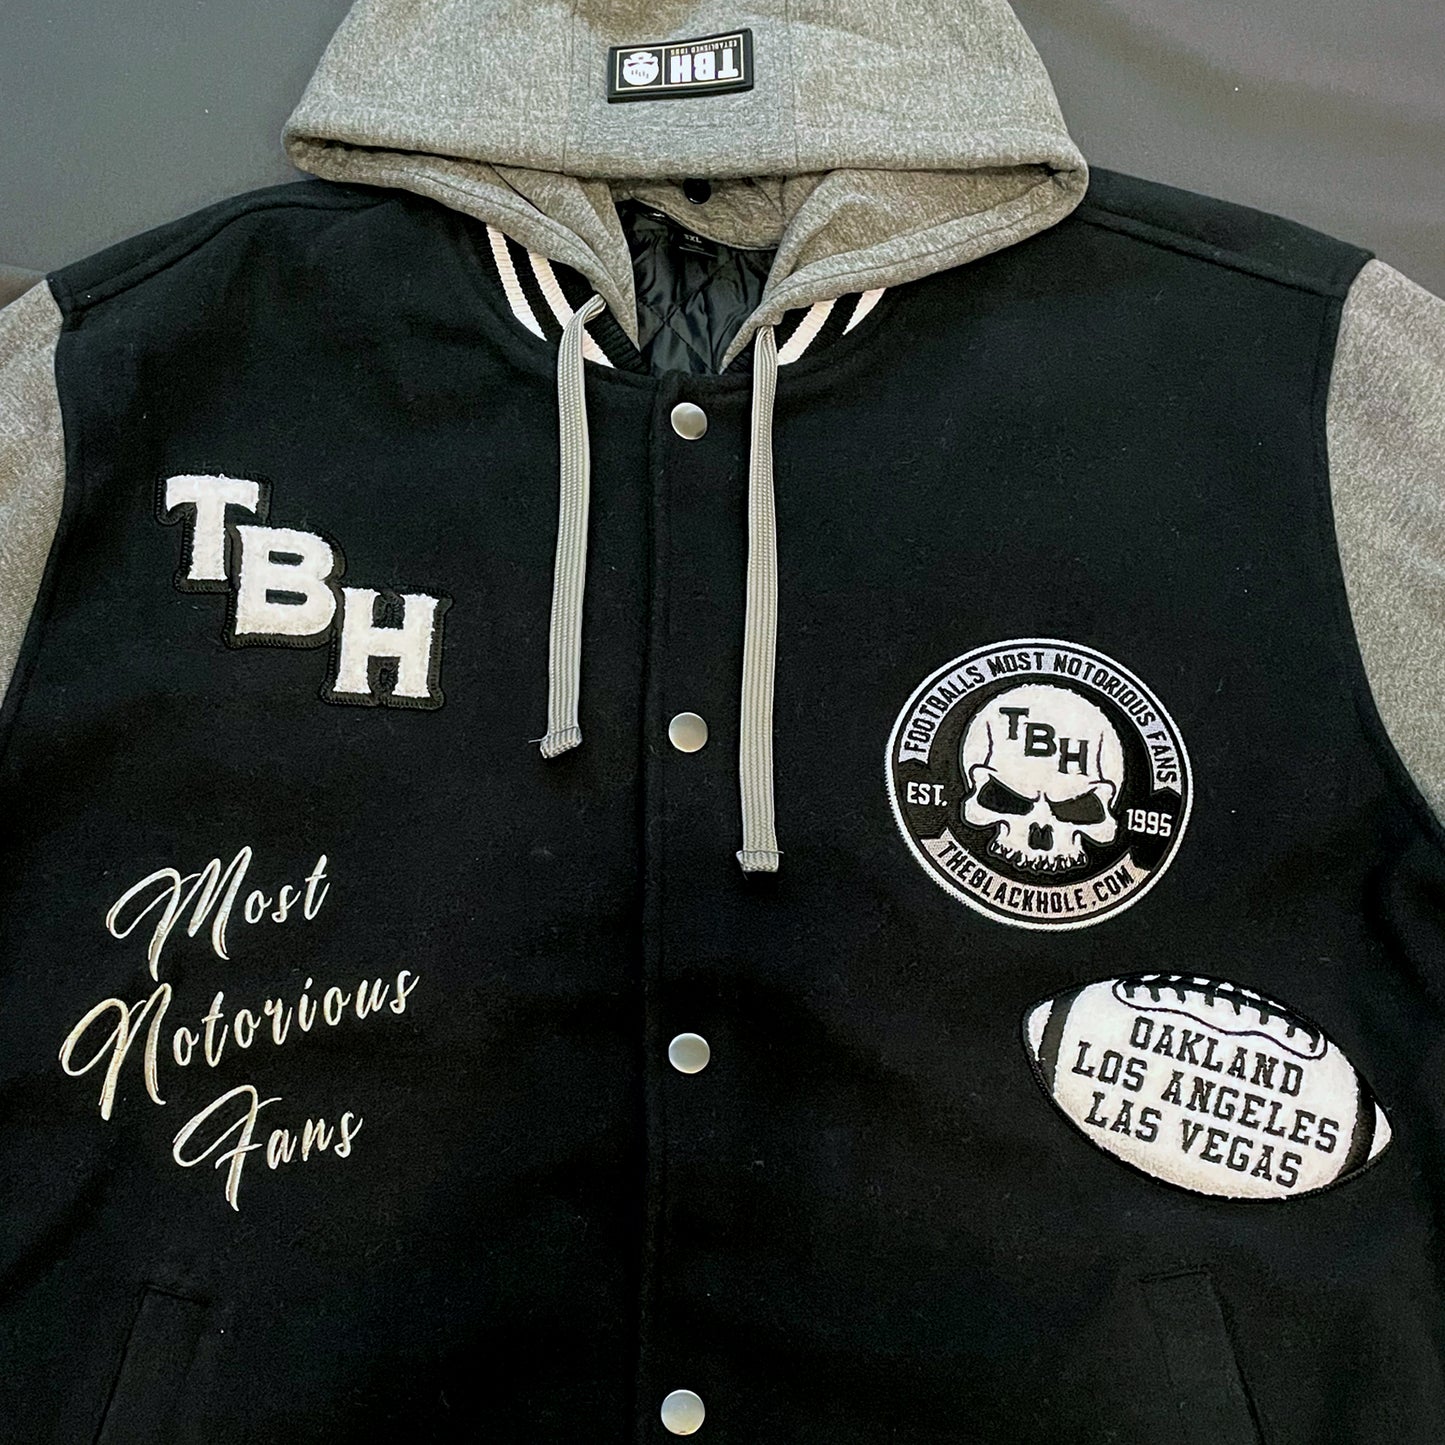 The Black Hole "Notorious" New VarCity Jacket TBH